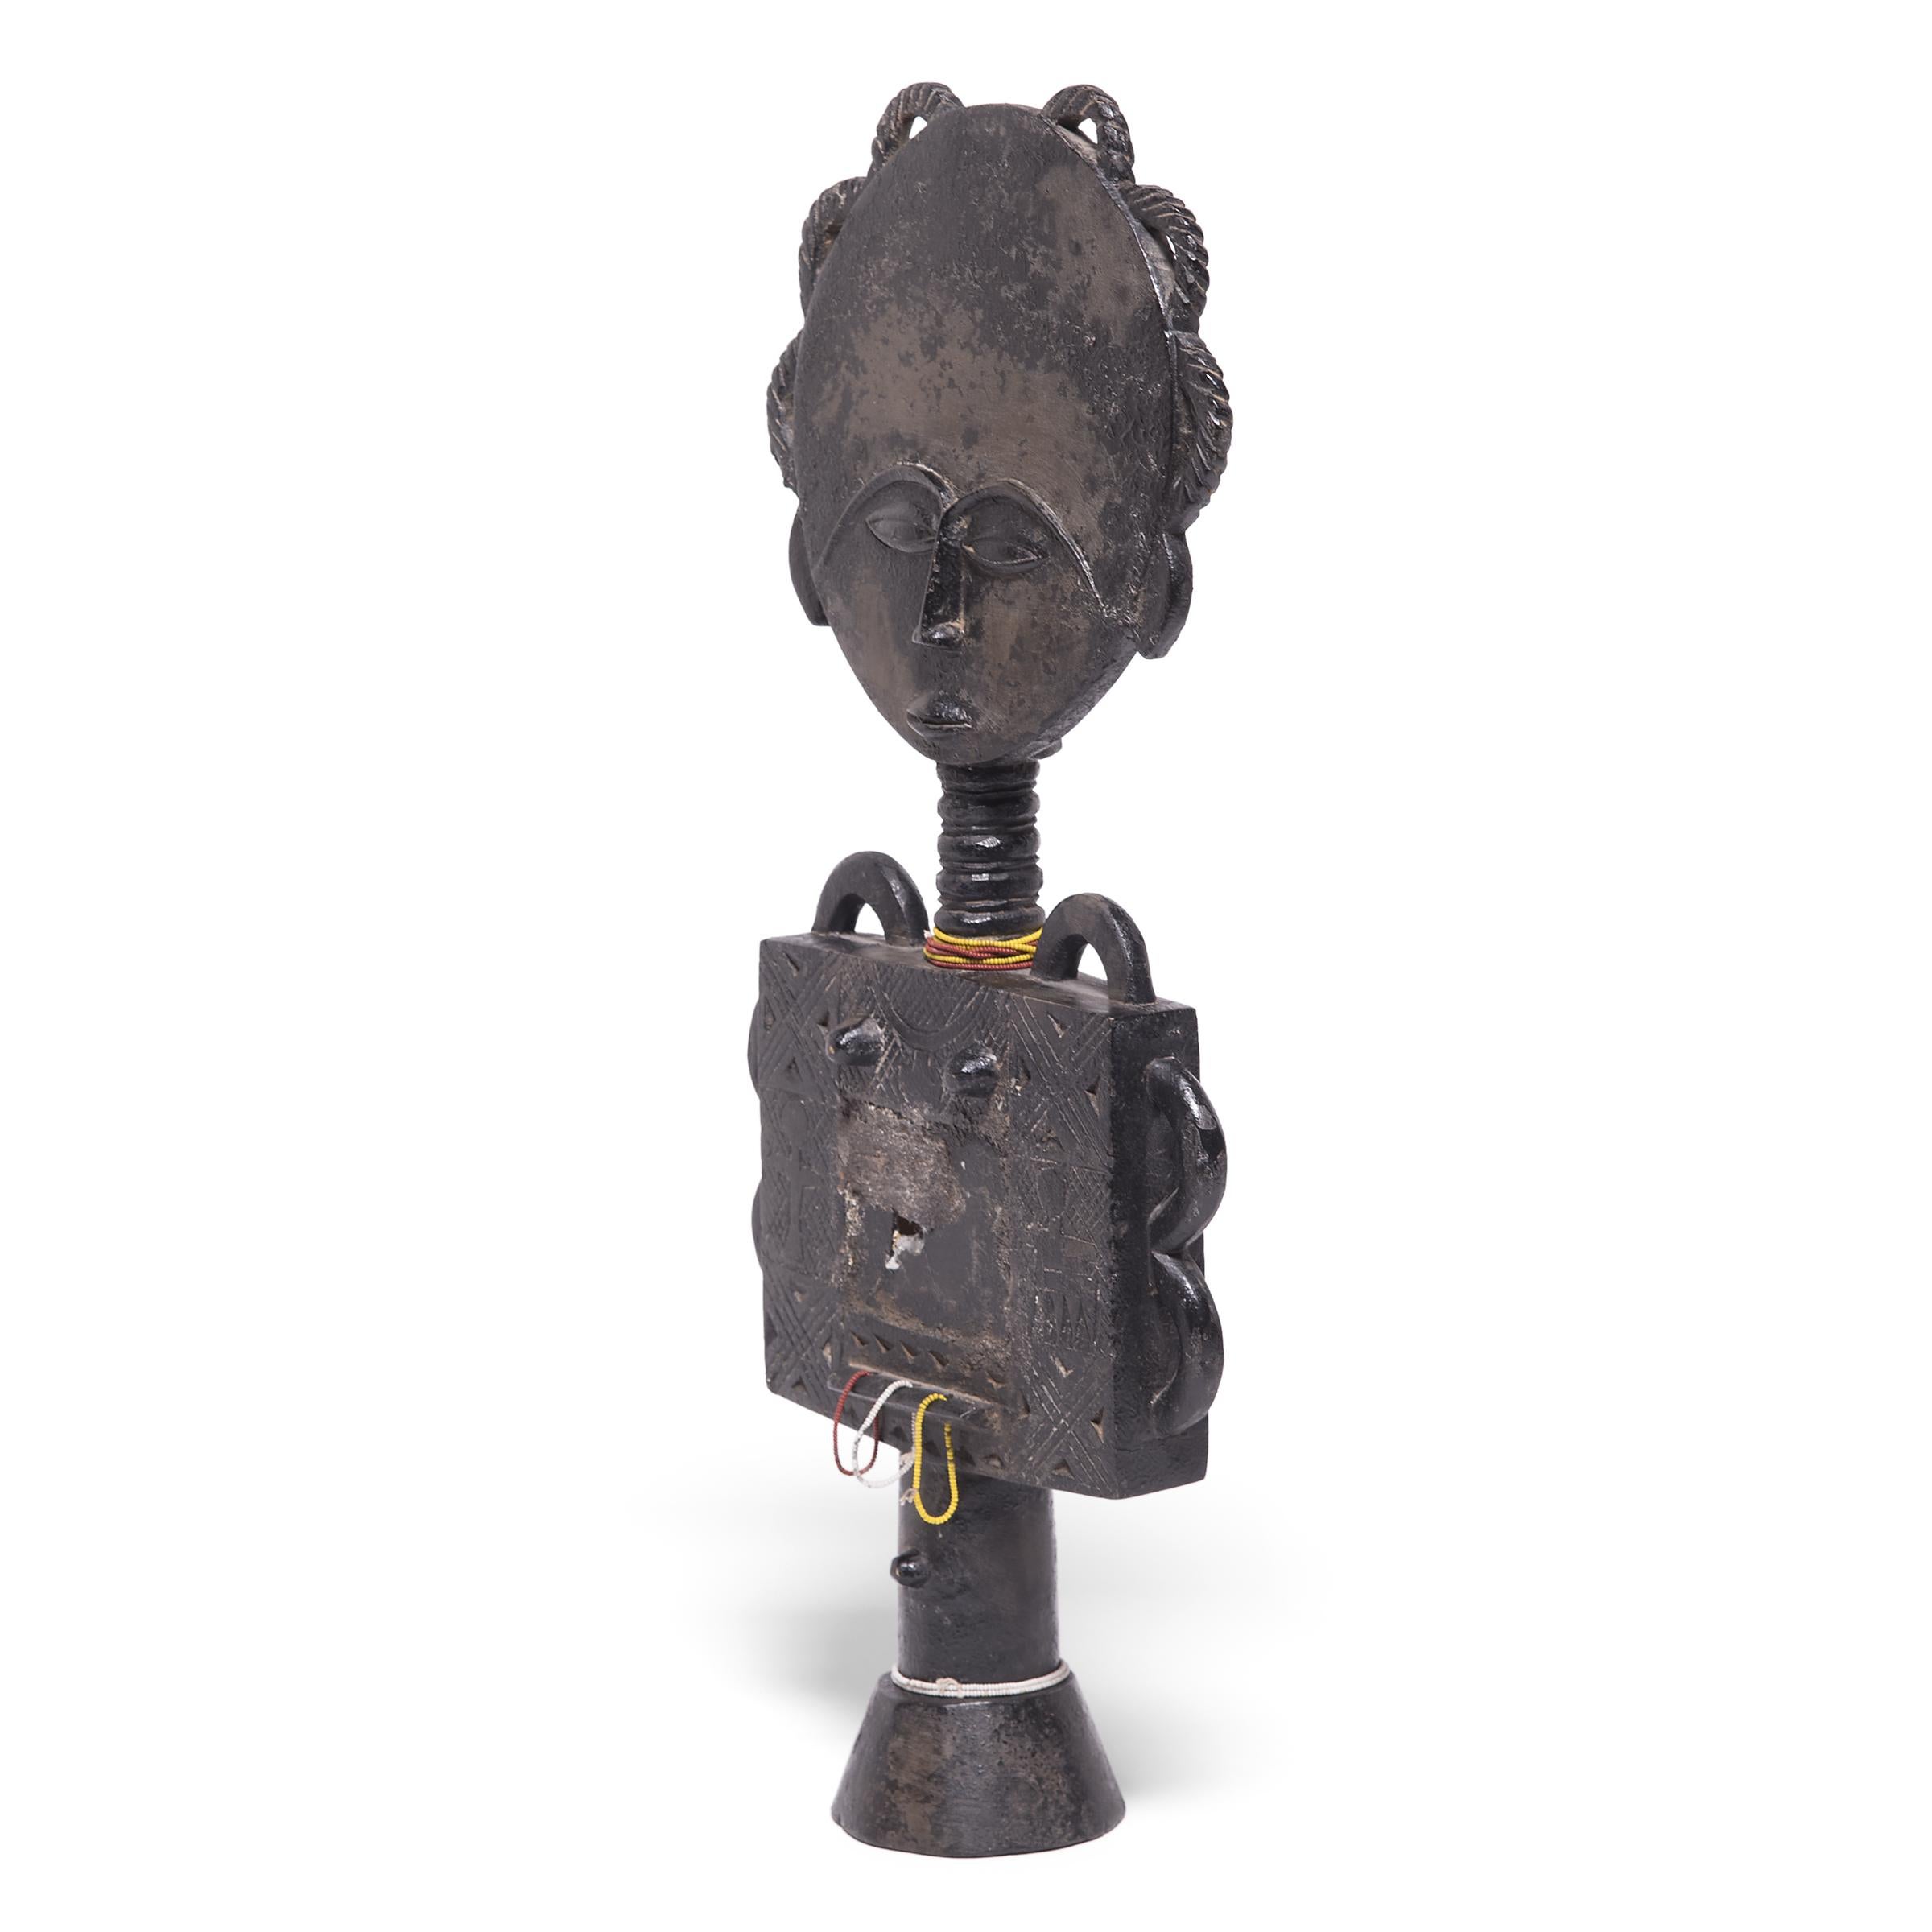 Disc-headed Acua'ba figures such as this one served an important role in Ashanti society. They began as a promise for a beautiful child, and in the event that the child disappeared, the figure would be offered to the responsible malevolent spirit in